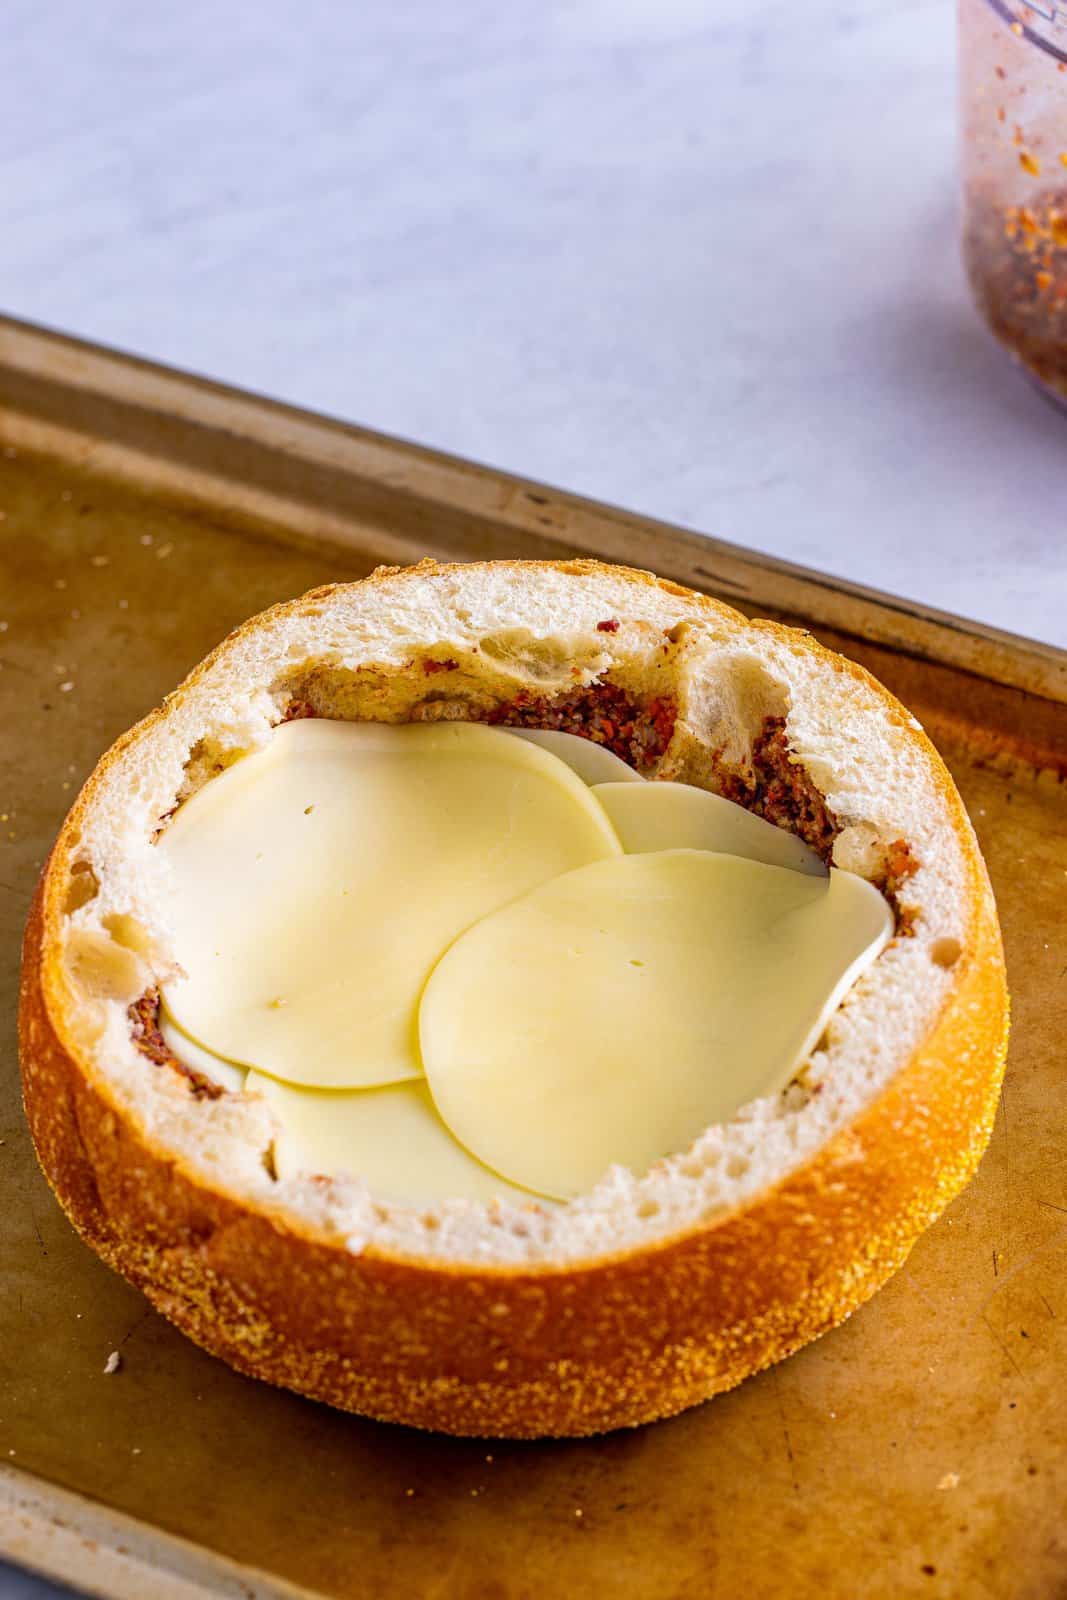 Provolone cheese layered over the olive spread.